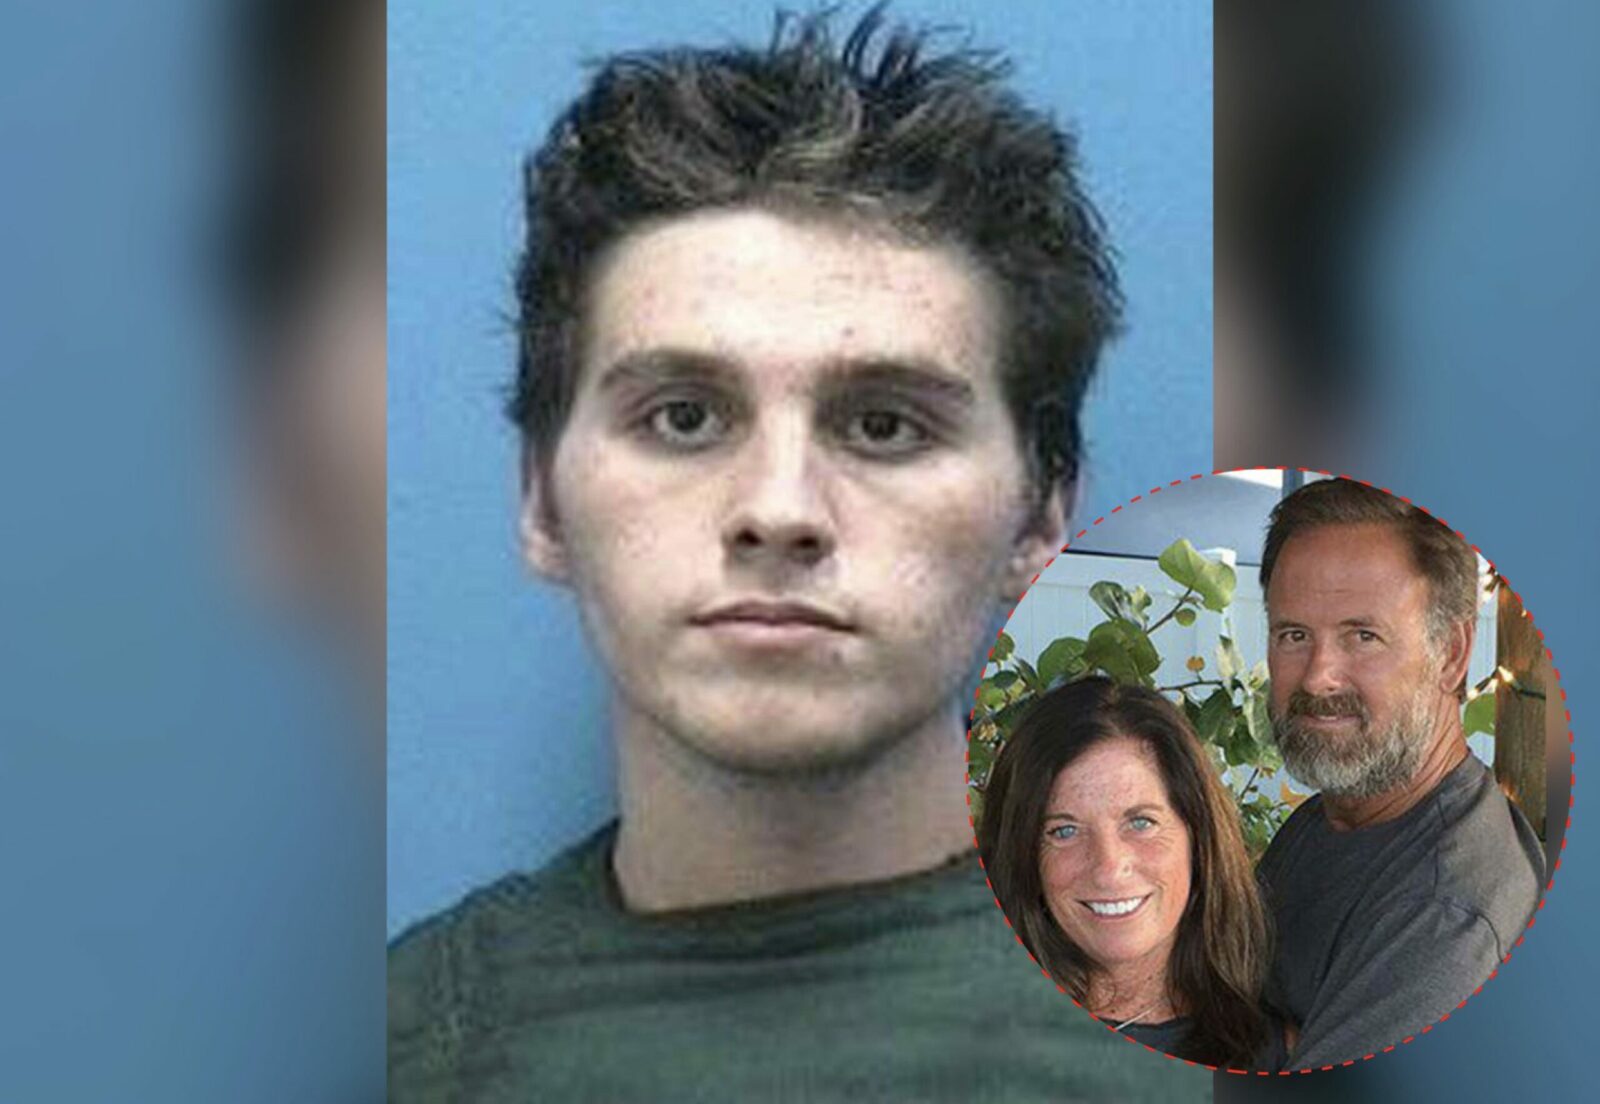 Florida Man Who Killed Couple And Tried To Eat Victim’s Face Found Not Guilty